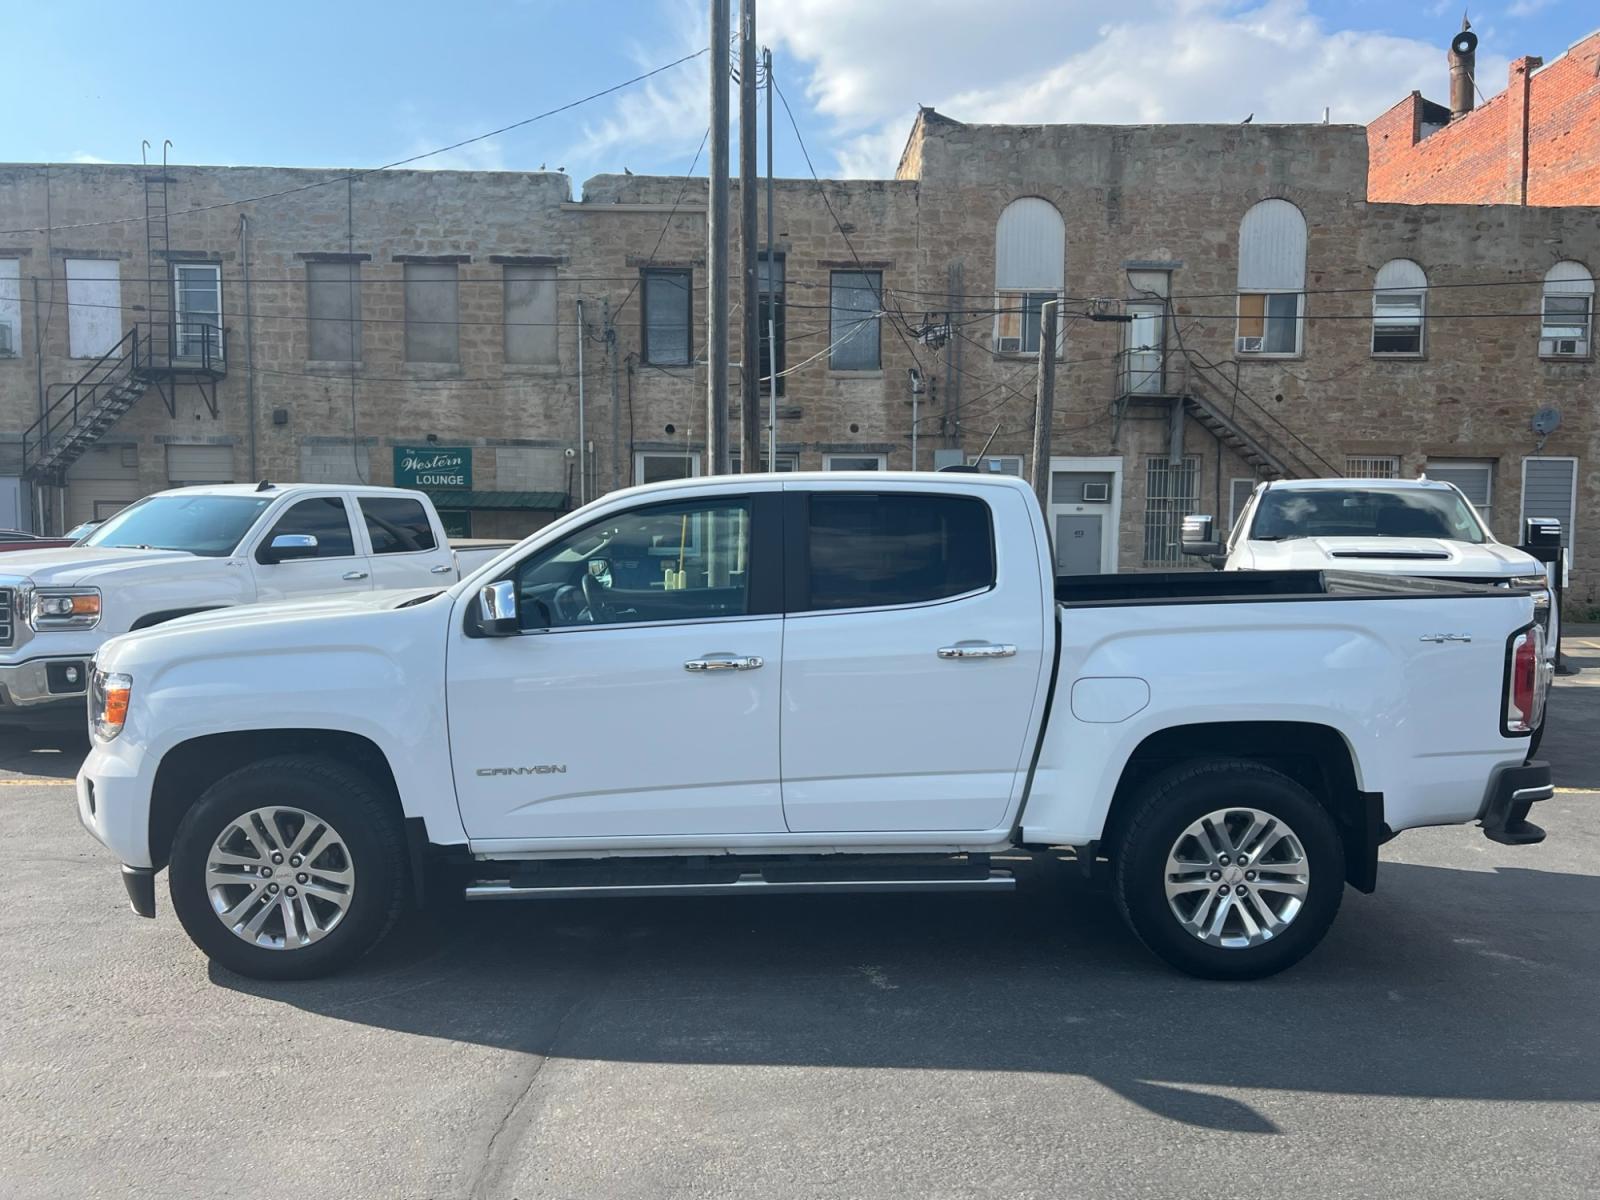 2020 WHITE /Black GMC Canyon SLT Crew Cab 4WD Short Box (1GTG6DEN8L1) with an 3.6L V6 DOHC 24V engine, 6A transmission, located at 116 5th Avenue South, Lewistown, MT, 59457, 47.063877, -109.427879 - Discover the Perfect Blend of Style and Capability - Pre-Owned 2020 GMC Canyon Crew Cab SLT 4WD! Key Features: 2020 Model Year Crew Cab Configuration SLT Trim for Premium Comfort 4WD for All-Terrain Adventures Reliable GMC Engineering Low Mileage Well-Maintained Pre-Owned Vehicle About - Photo #5